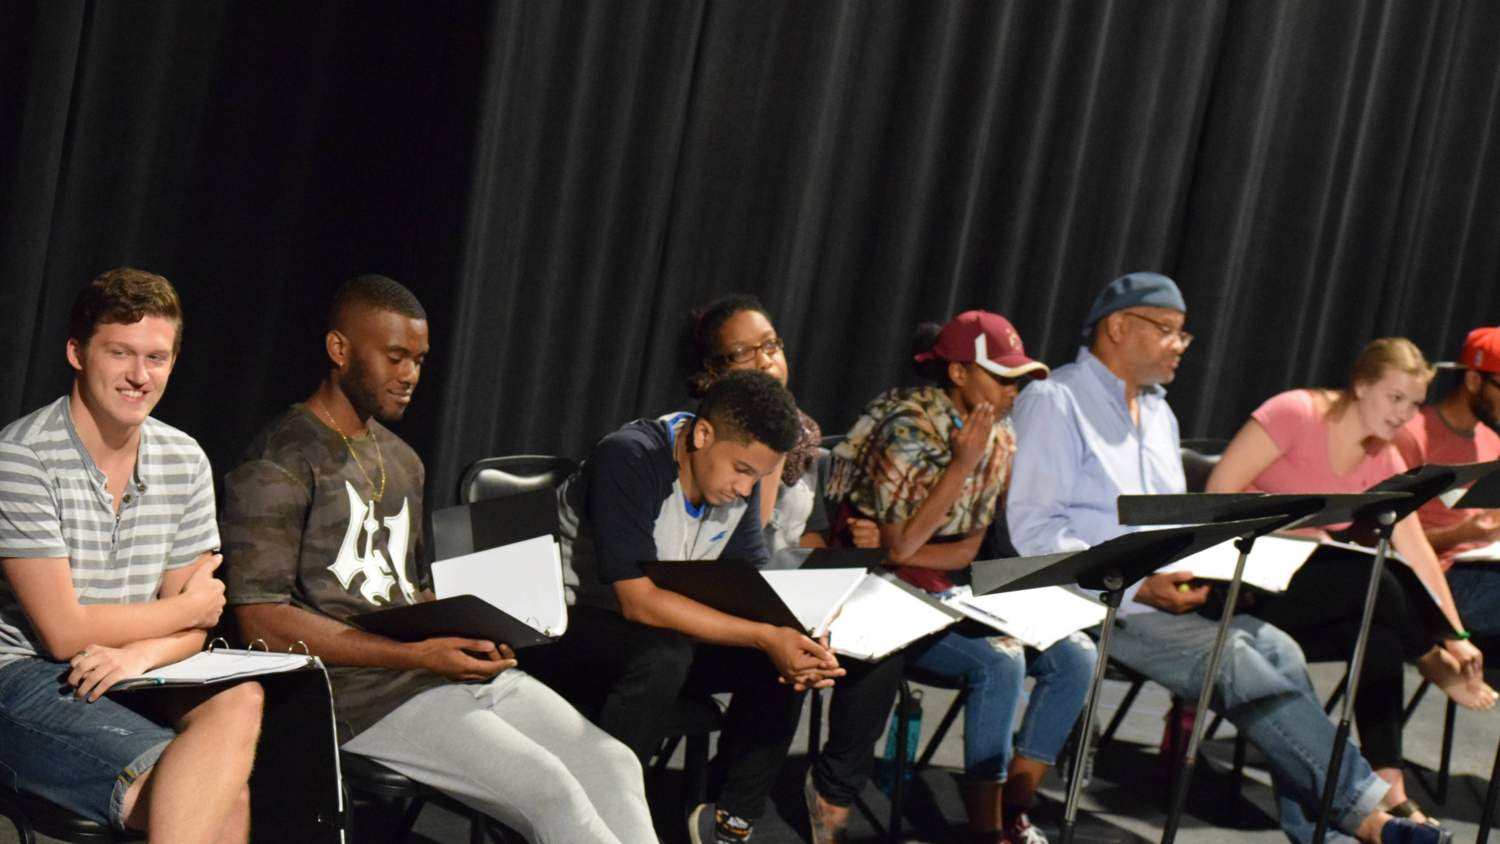 Student actors on stage reviewing the script.